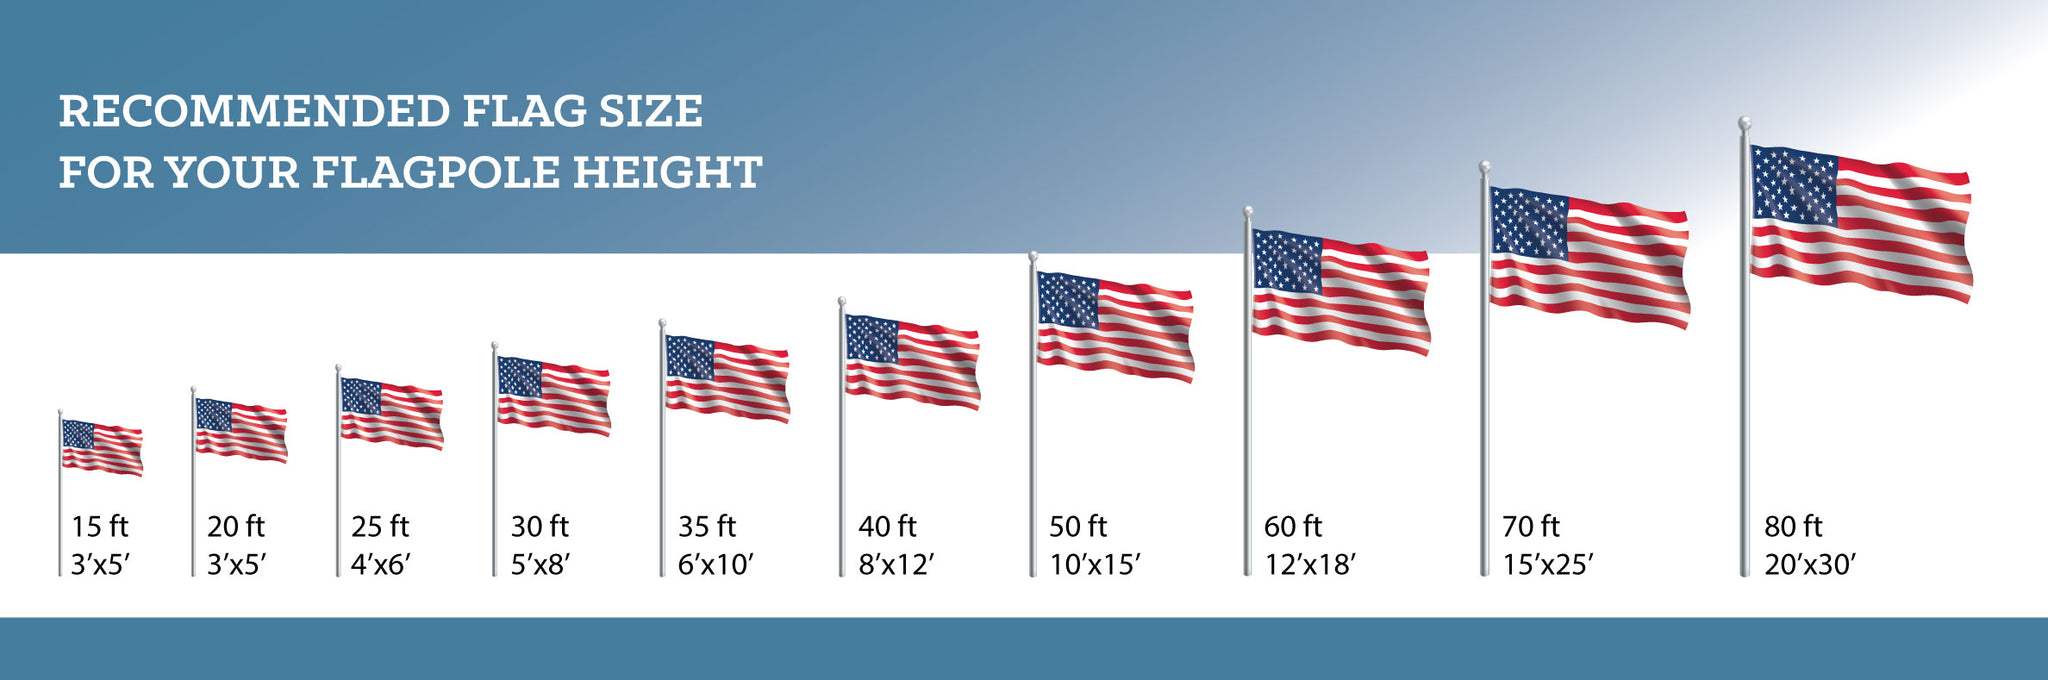 Recommended Flag Size for Your Flagpole Height